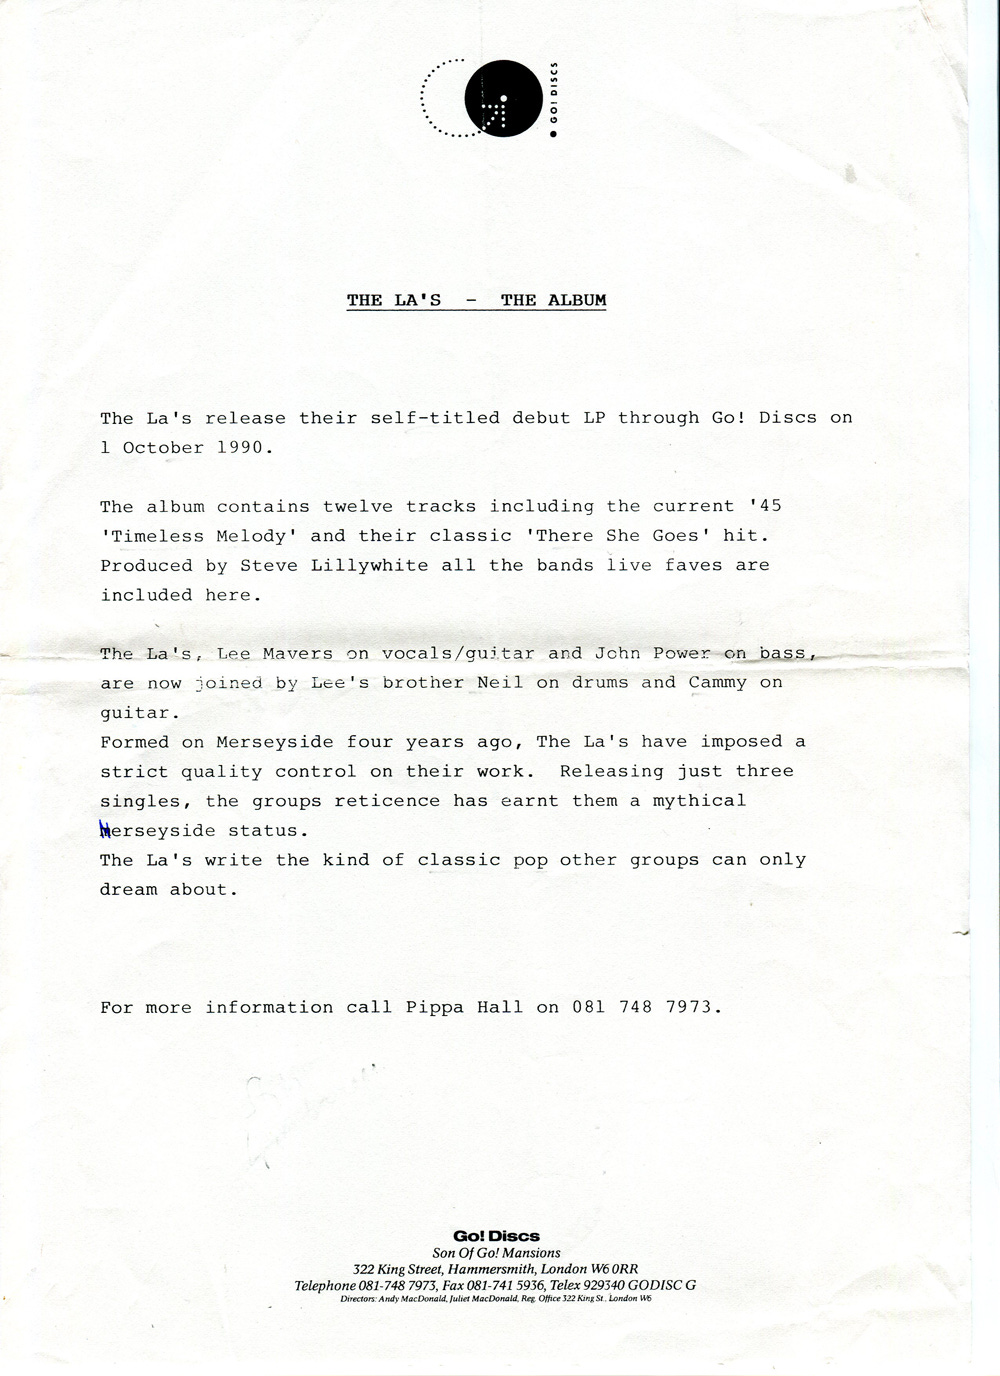 Press release for the La's from Go Discs.